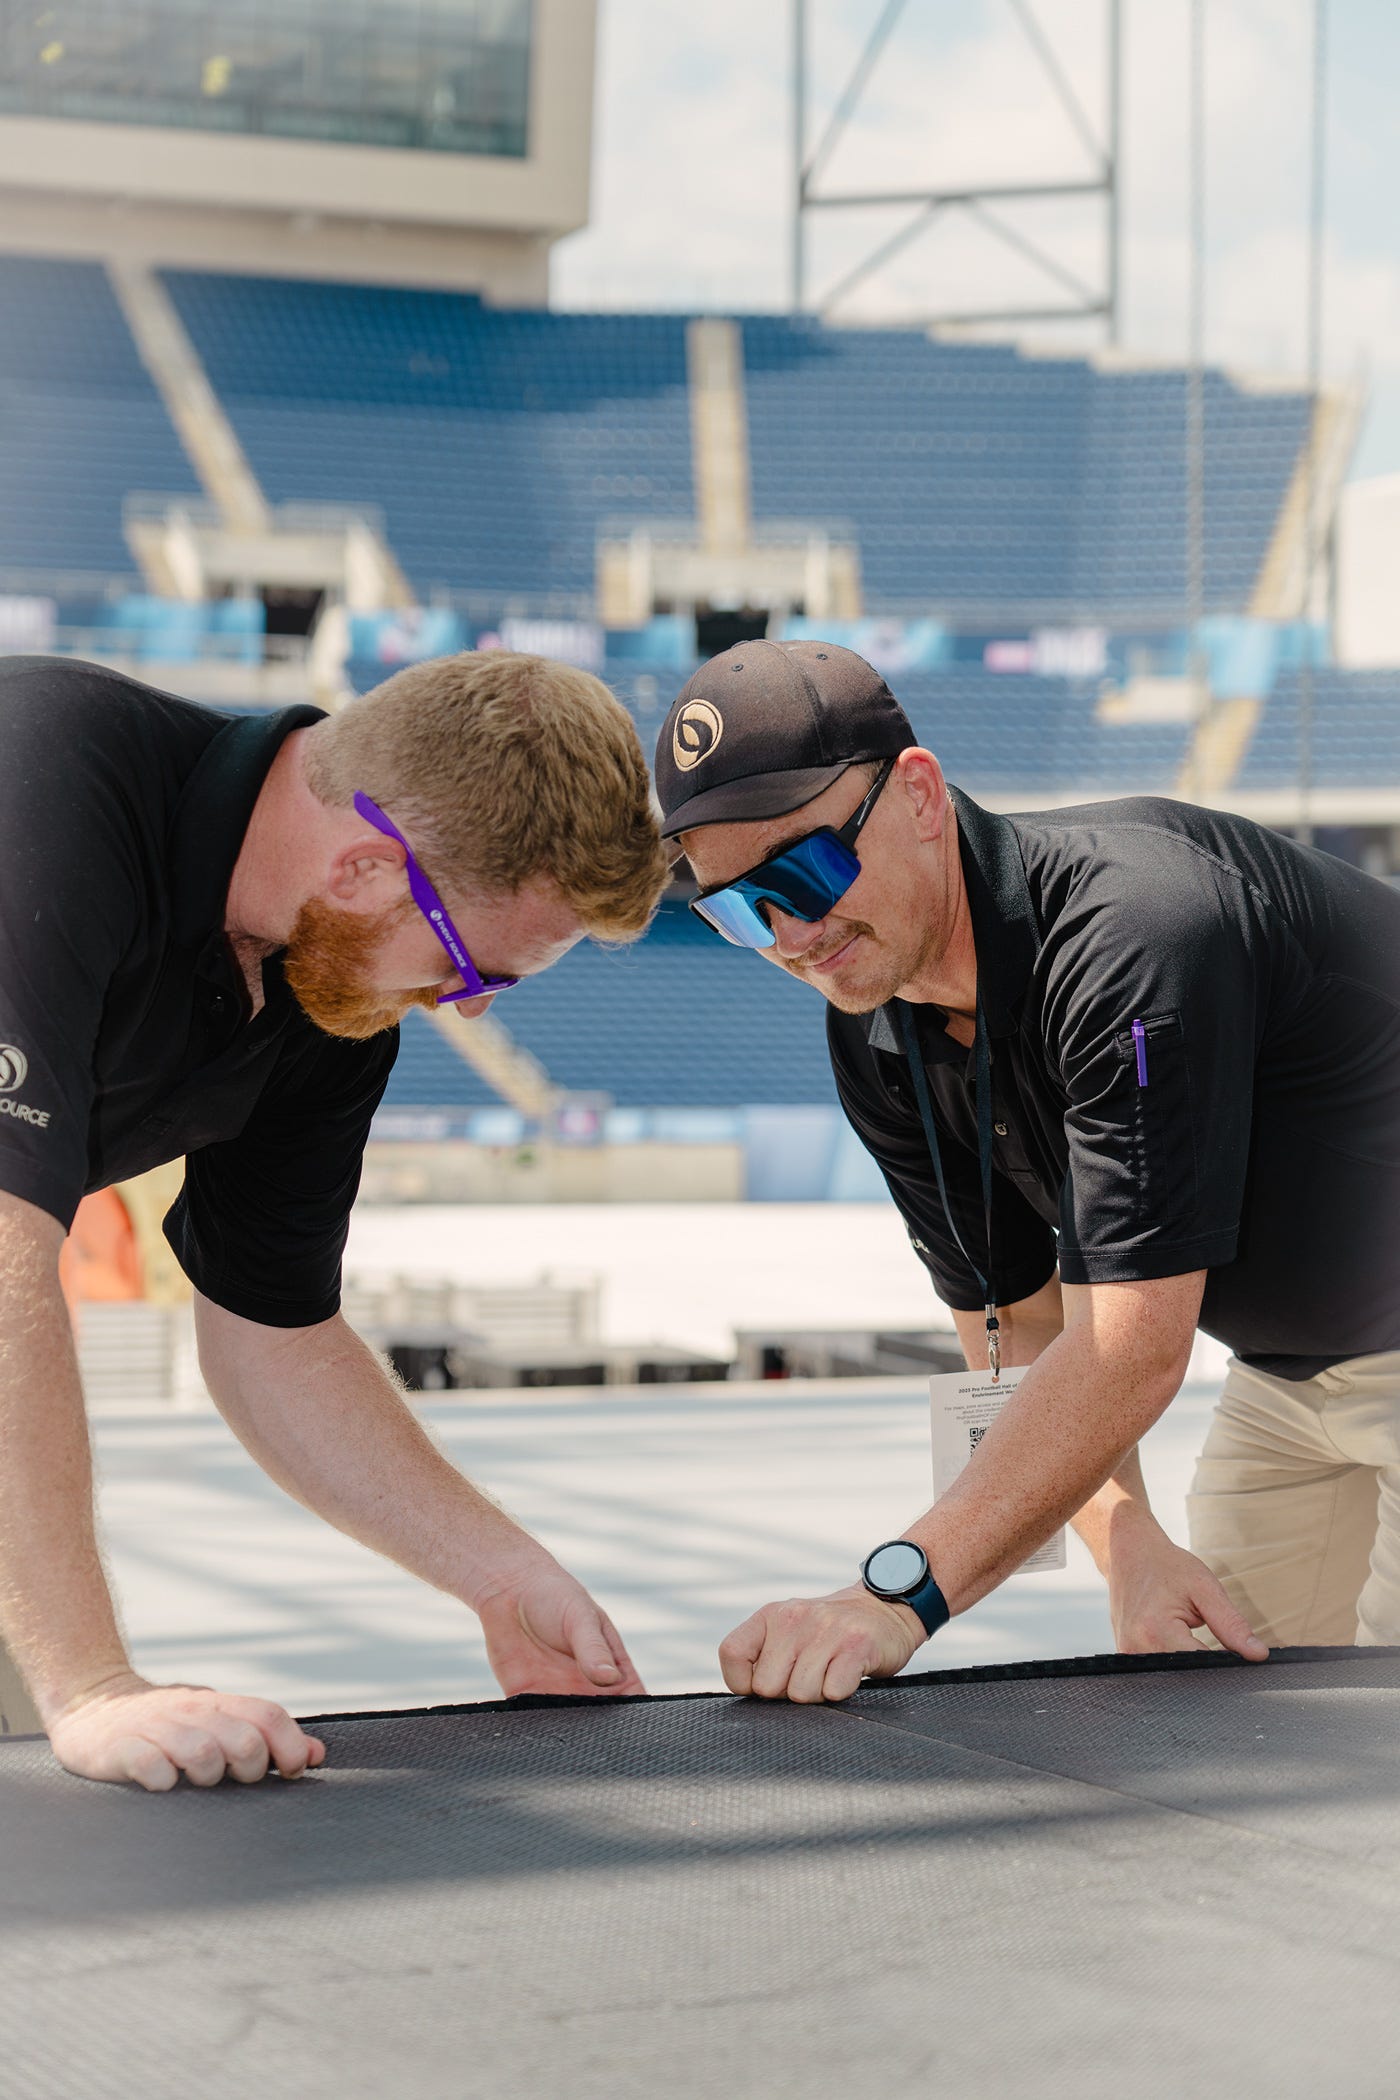 Event Source delivery representatives setting up an event in a football stadium